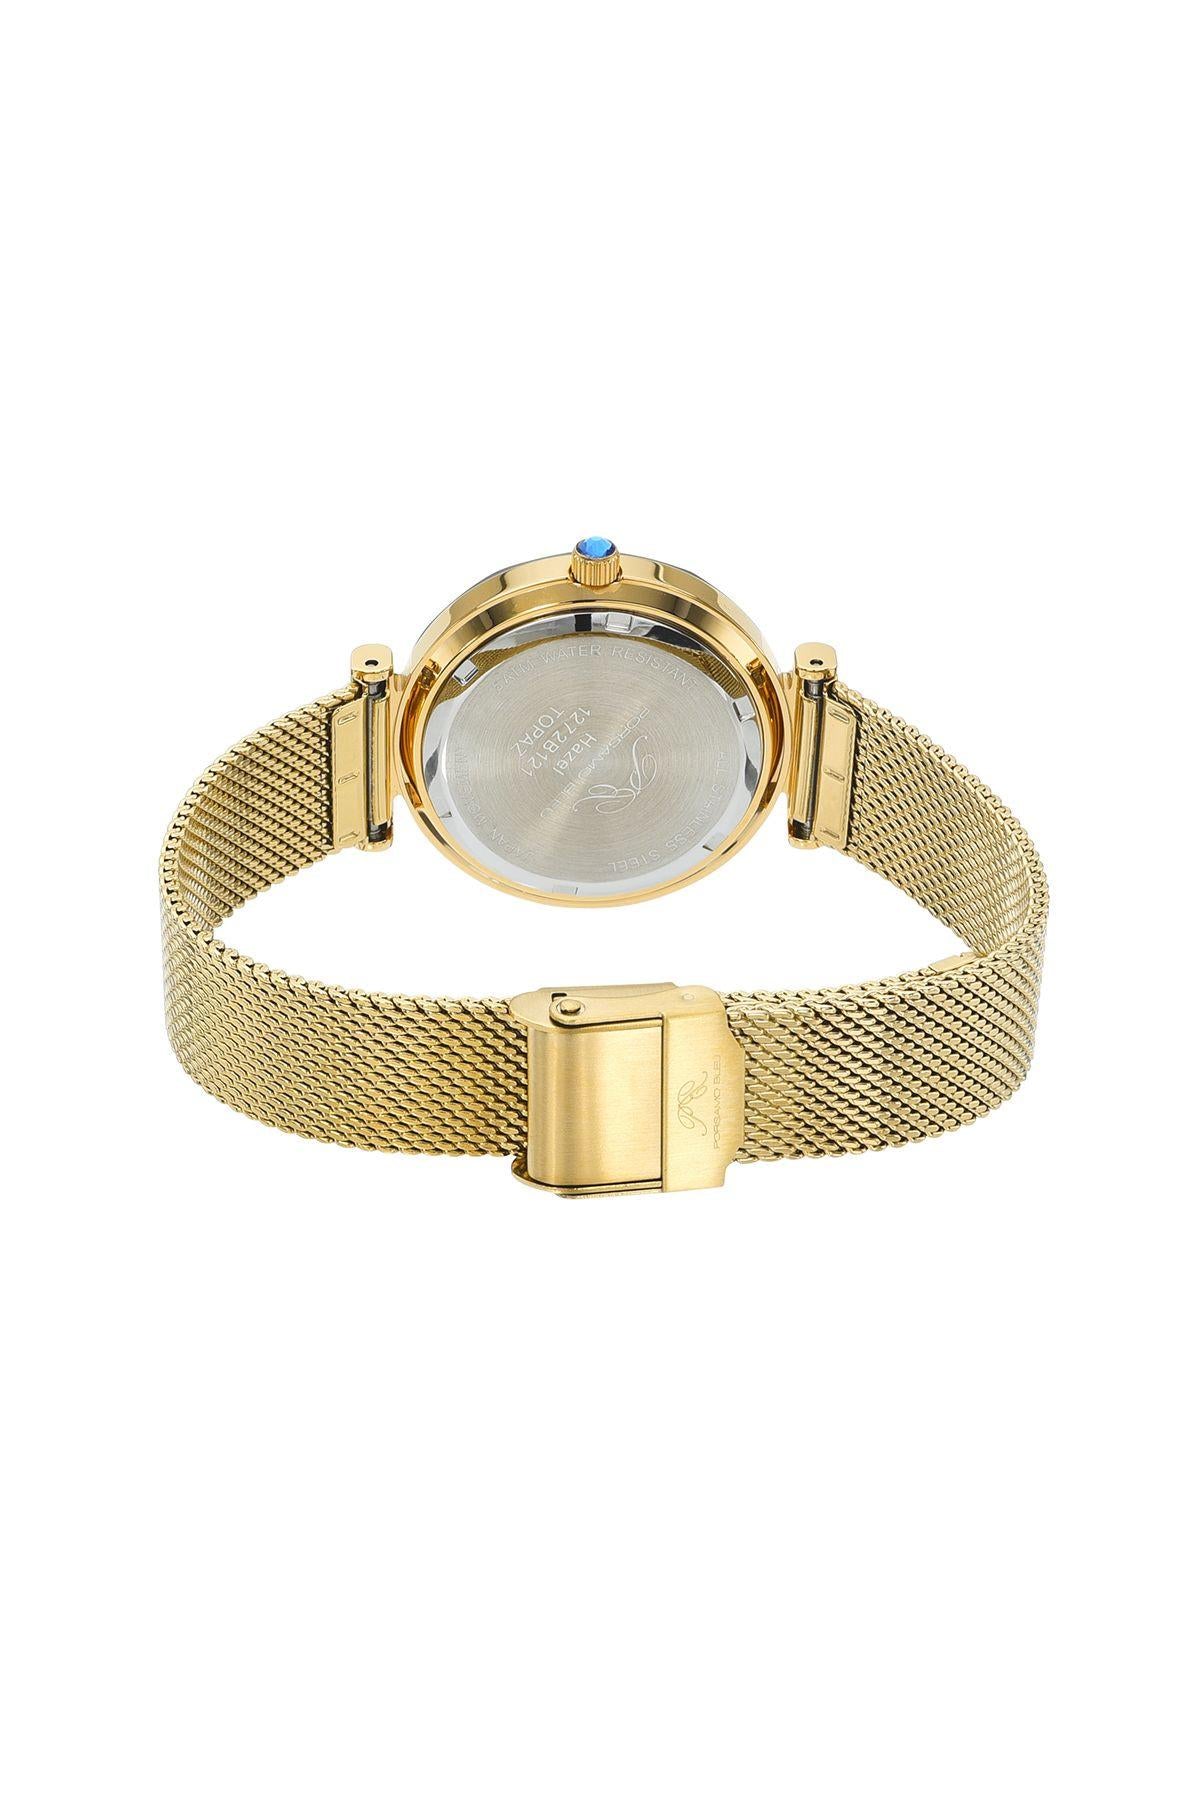 Porsamo Bleu Hazel Luxury Topaz Women's Stainless Steel Watch With Blue MOP Dial And Faceted Crystal Bezel, Gold, 1272BHAS